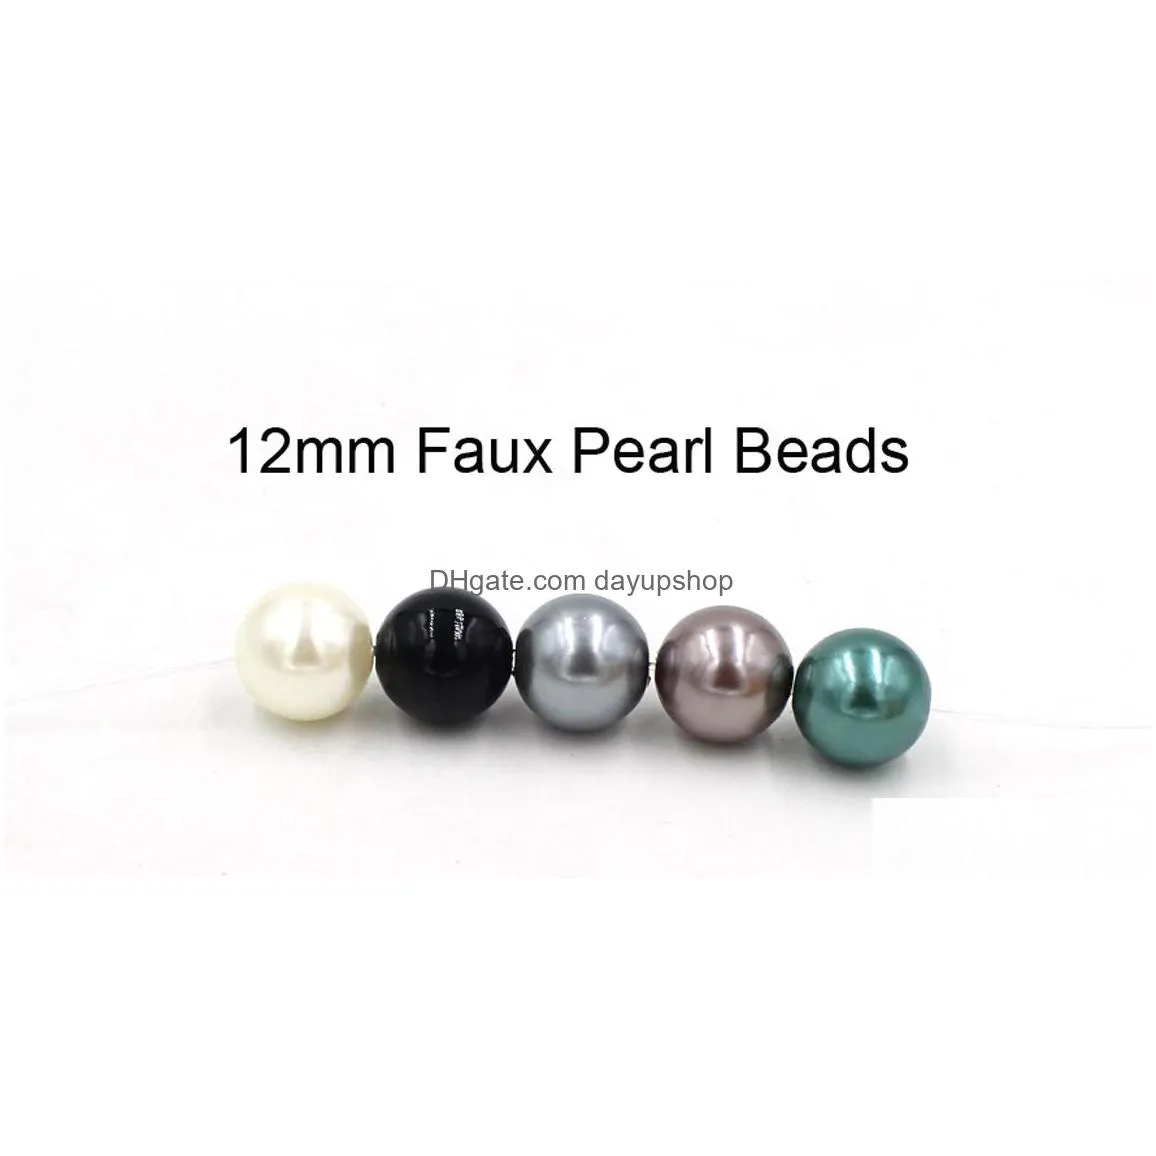 wholesale 5 colors 12mm faux pearl beads round loose spacer beads for jewelry making diy charm bracelets earrings women girl